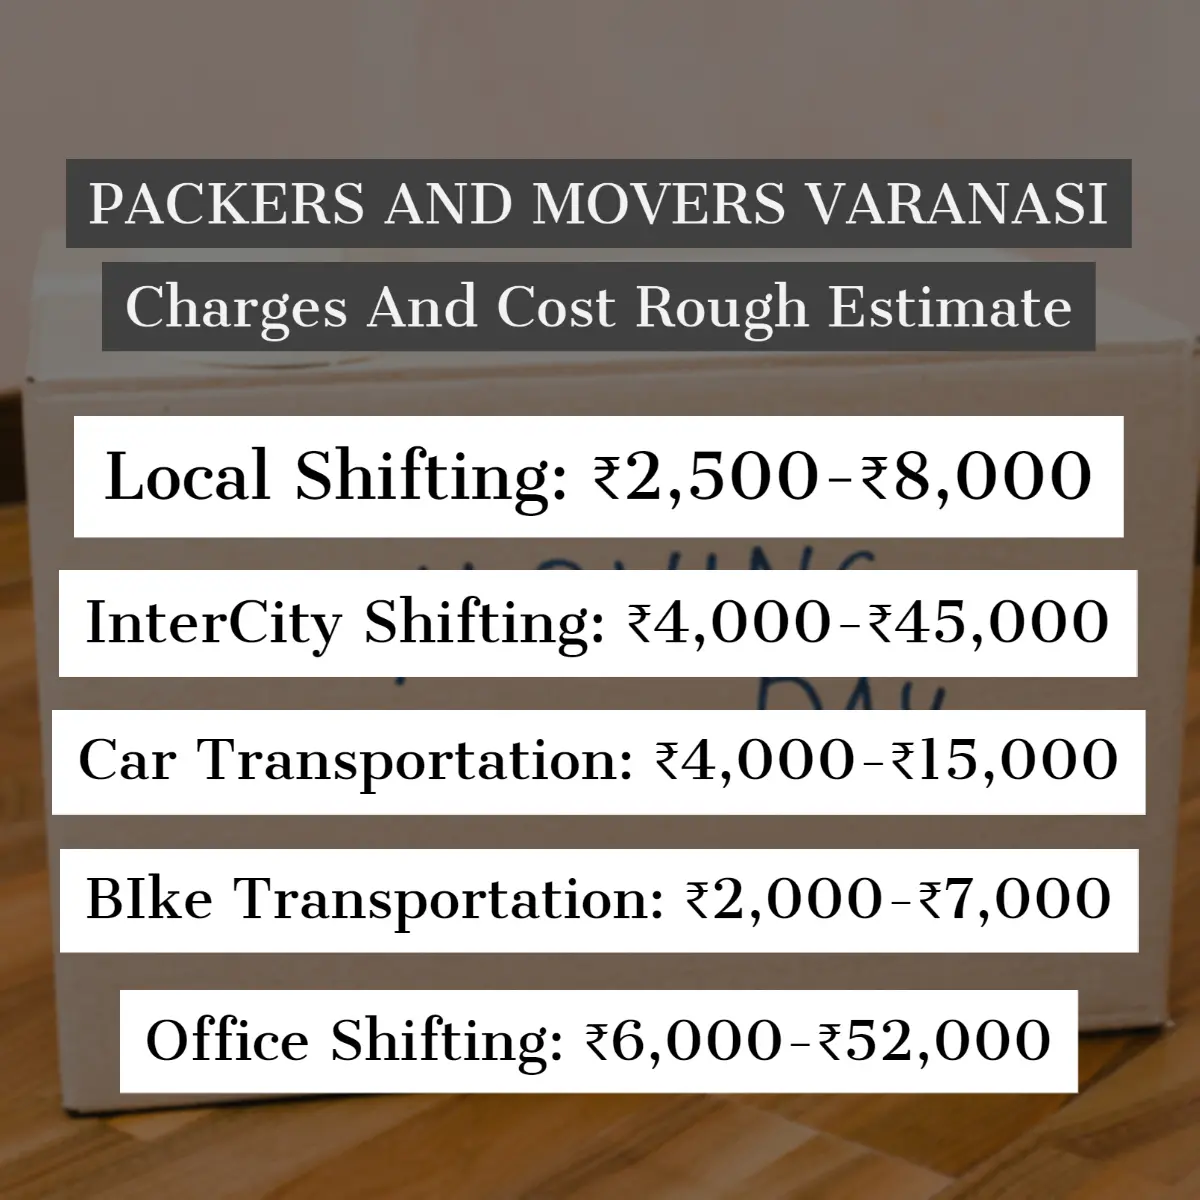 Packers and Movers Varanasi Charges